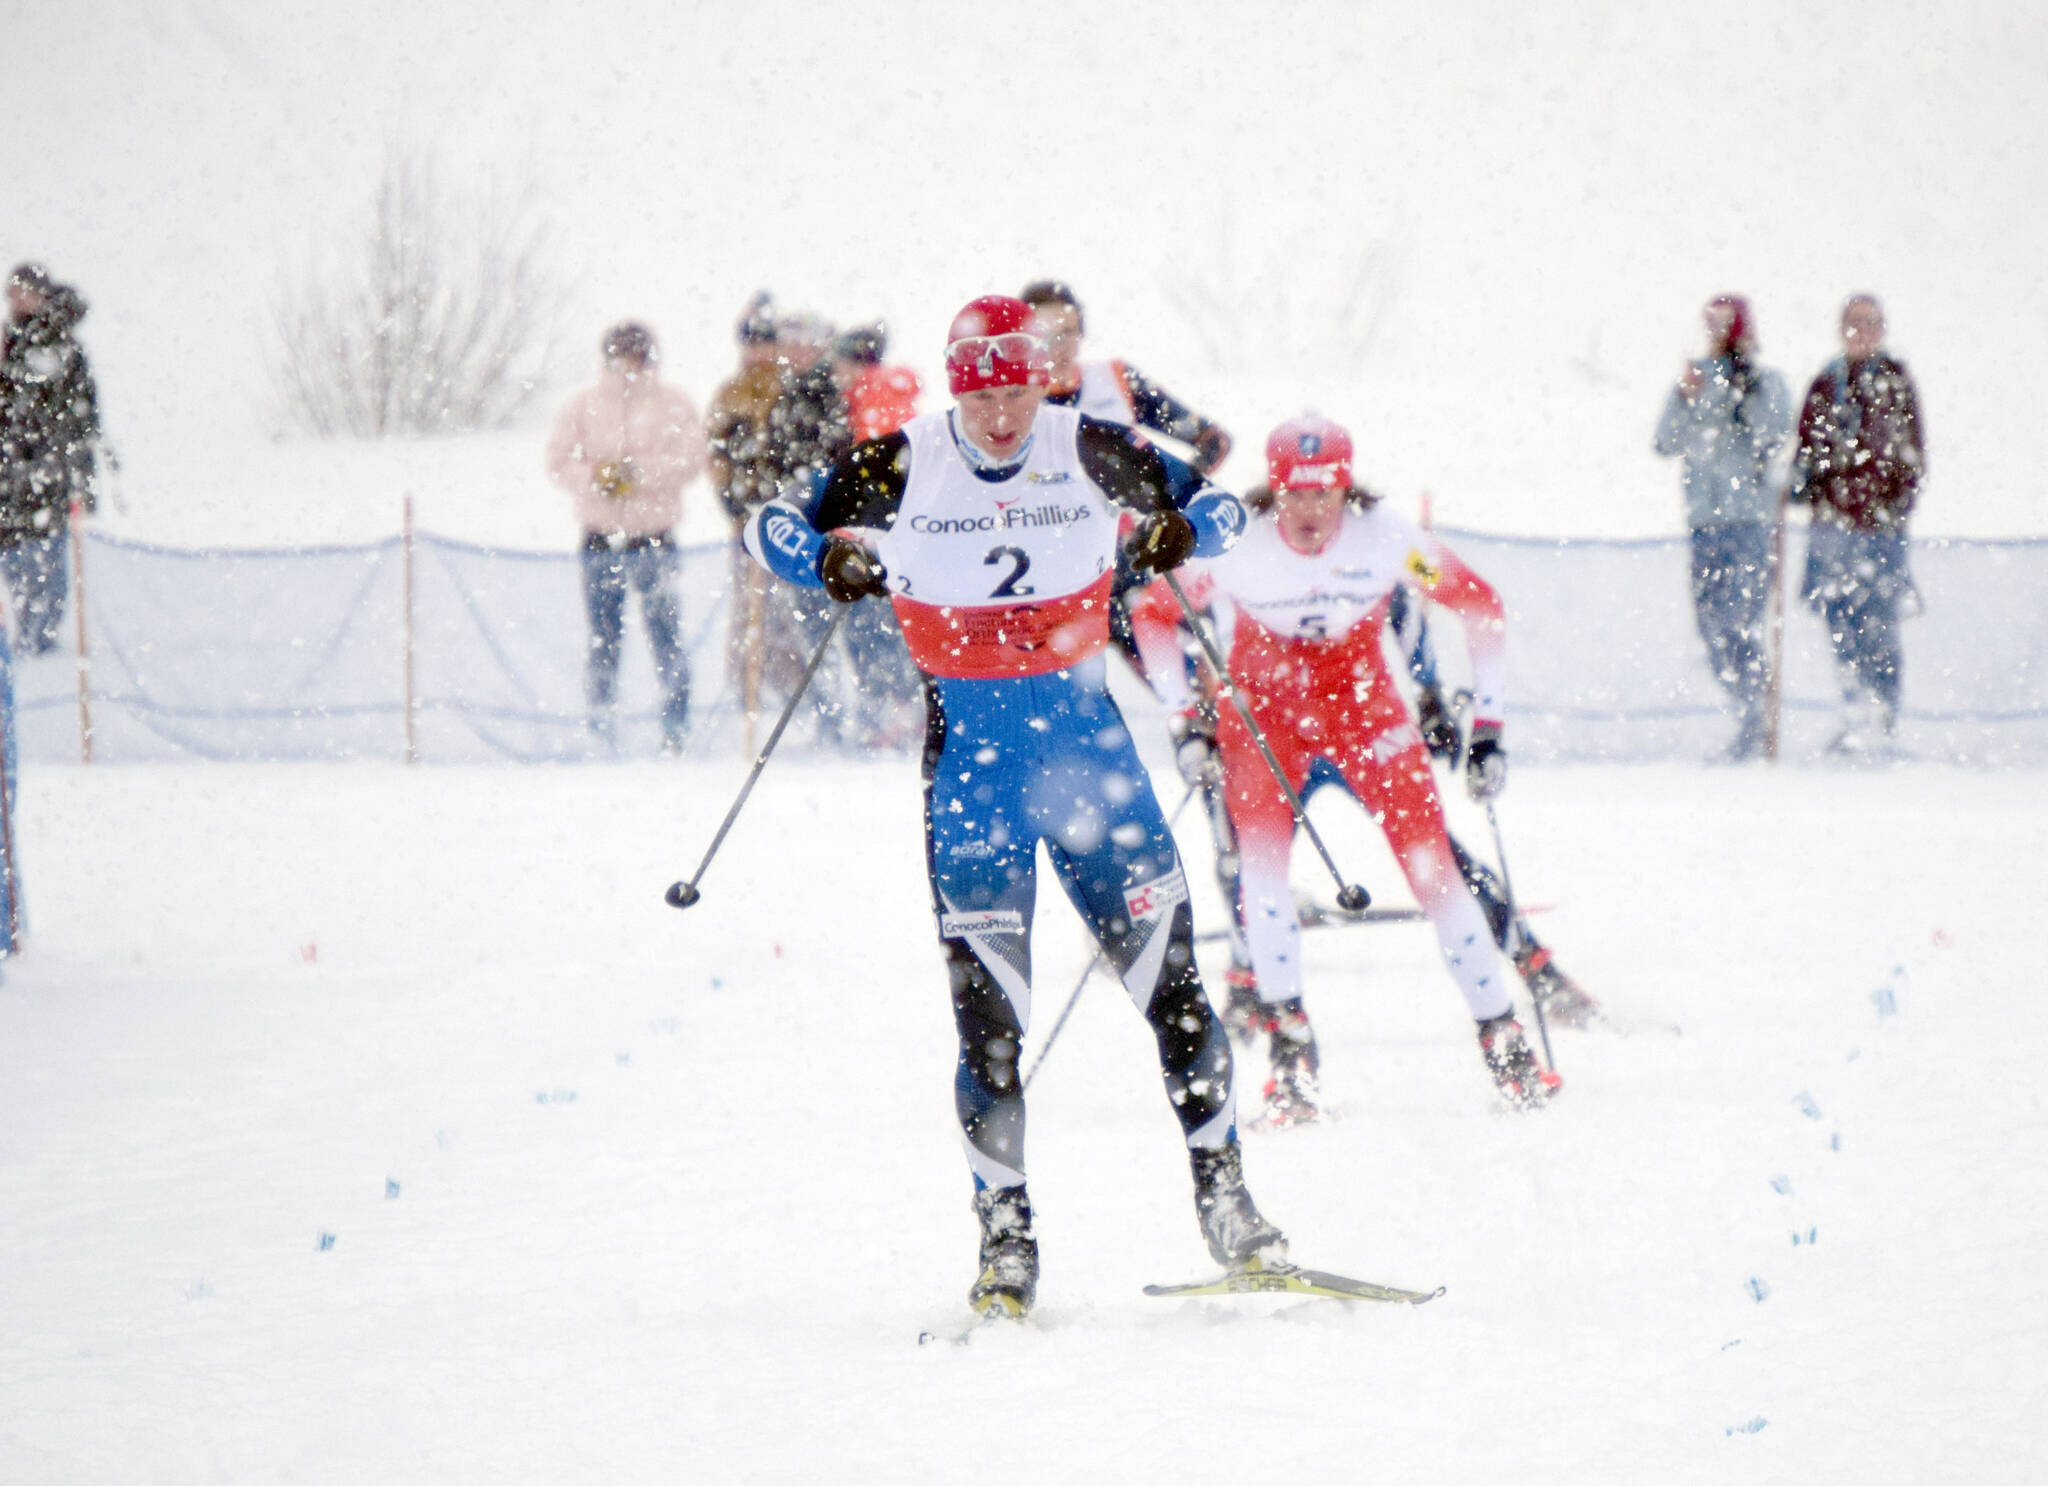 Karl Danielson, a graduate of Kenai Central currently skiing for Alaska Pacific University, wins the Under-16 and over sprint at Besh Cup 3 on Saturday, Jan. 15, 2022, at Tsalteshi Trails just outside of Soldotna, Alaska. (Photo by Jeff Helminiak/Peninsula Clarion)